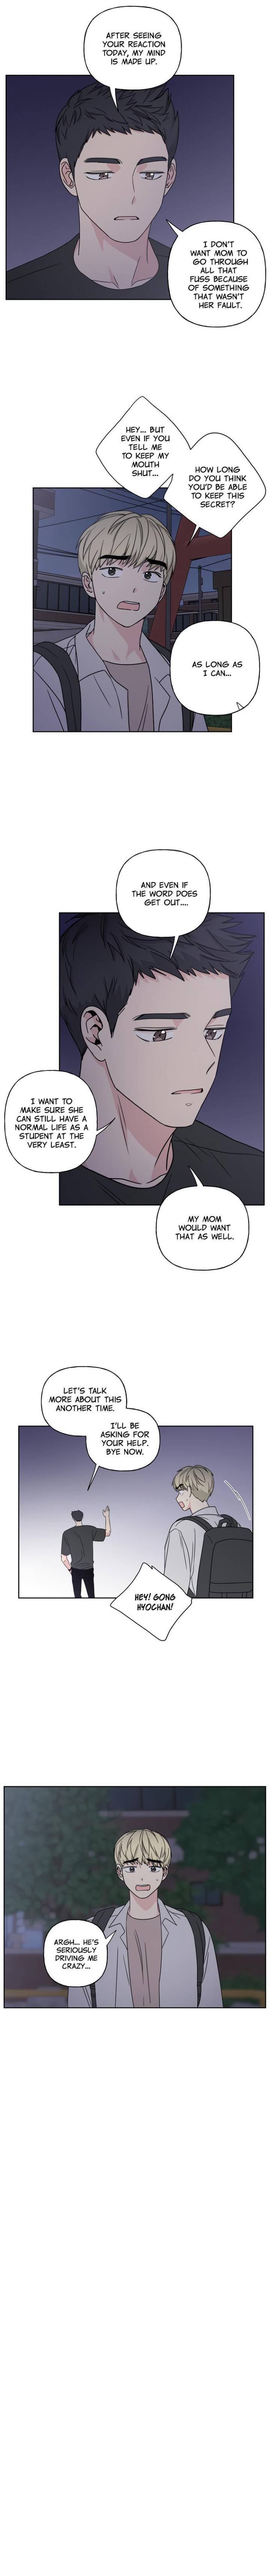 mother-im-sorry-chap-22-5